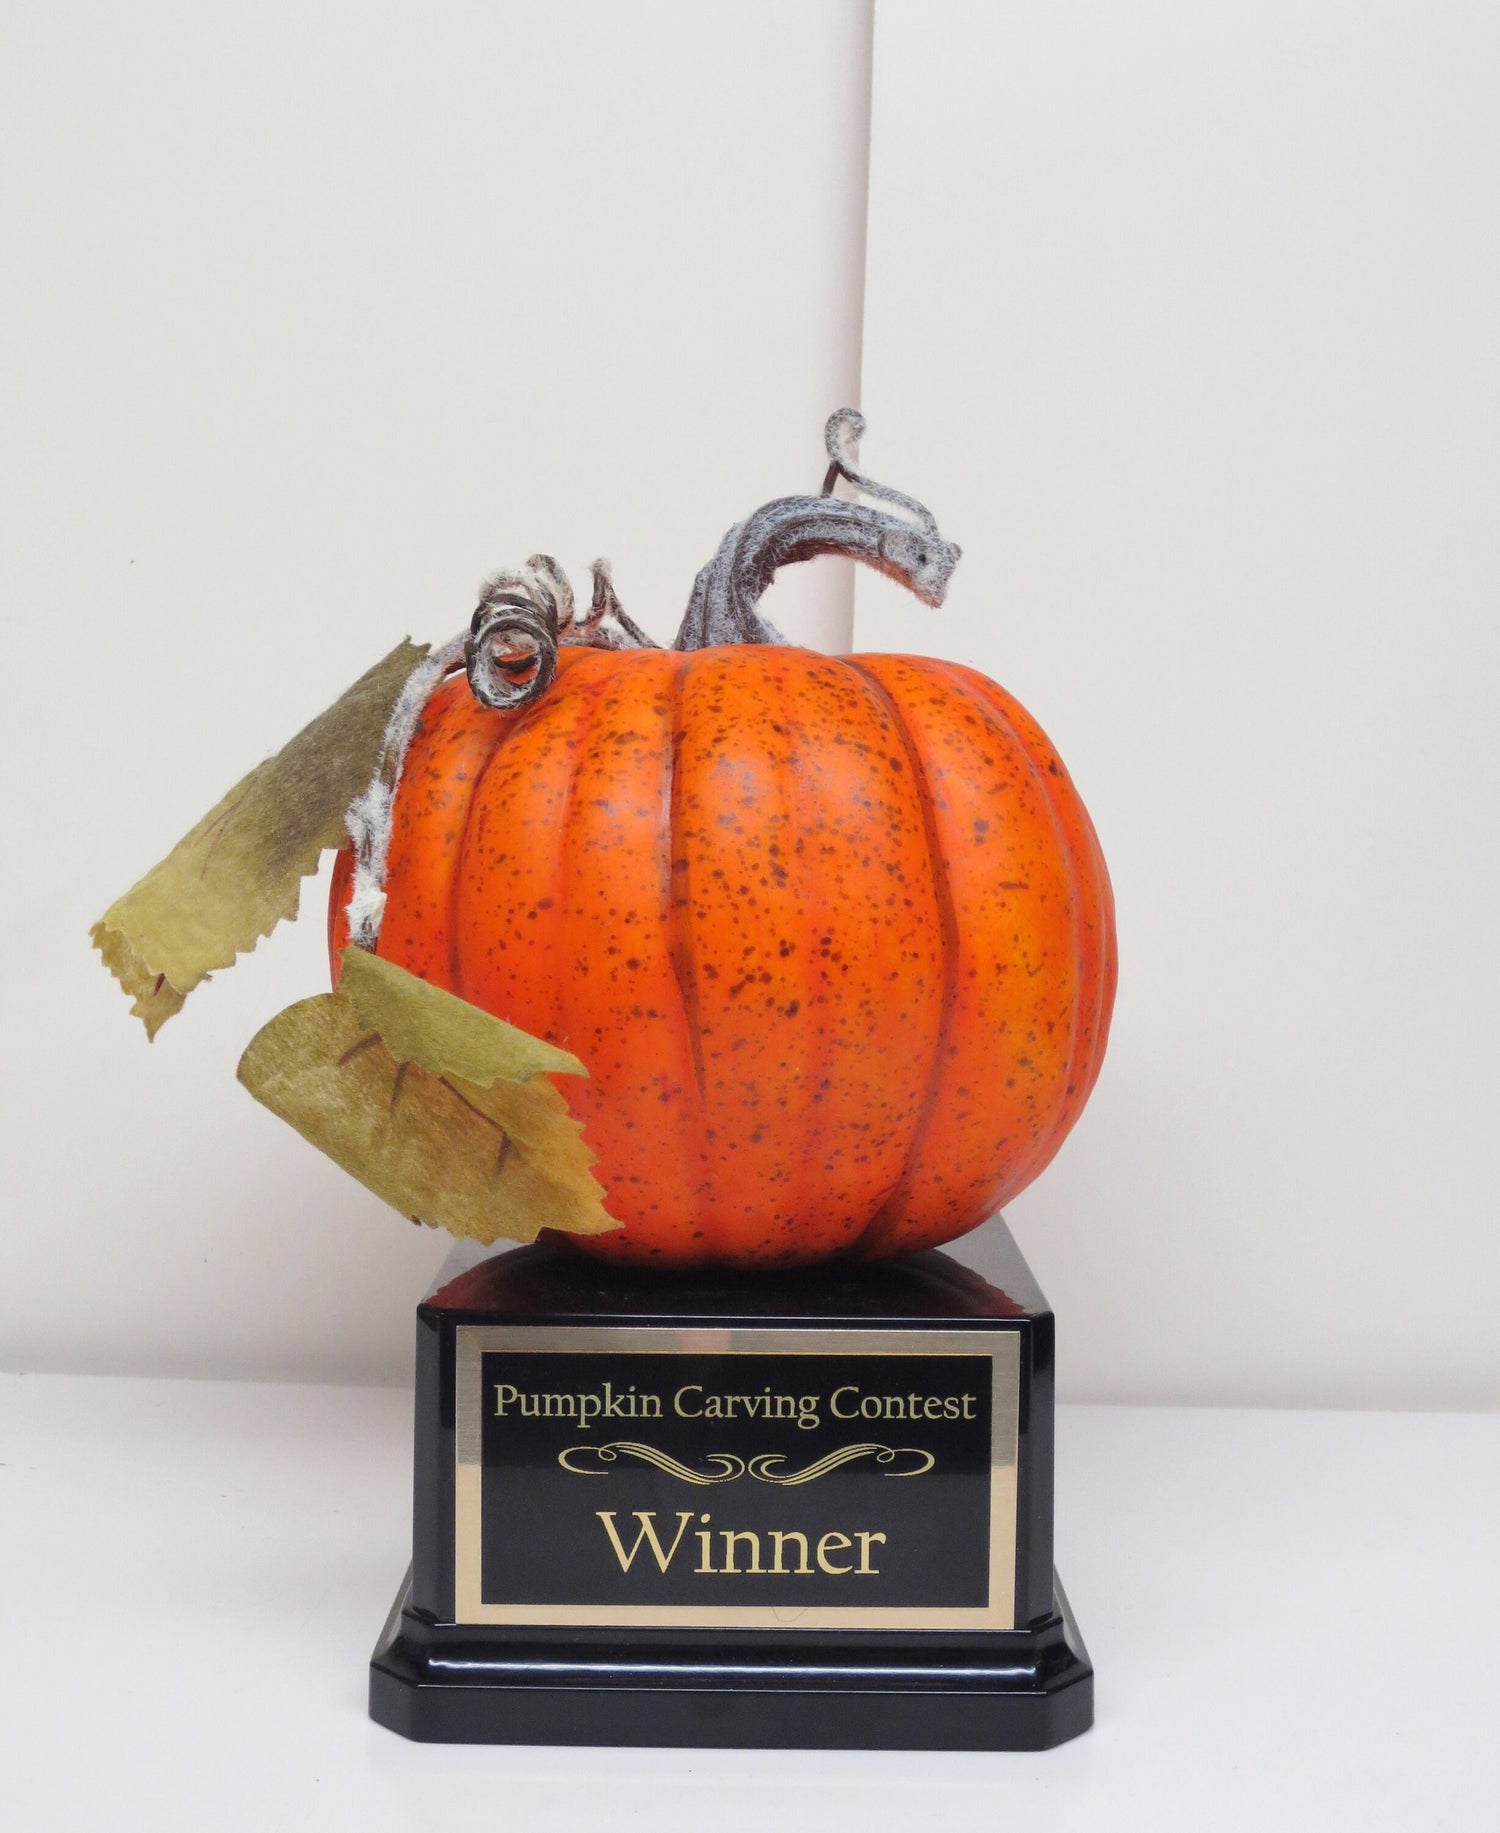 Halloween Trophy Rustic Speckled Pumpkin with Leaves Carving Contest Trophy or Best Costume Contest Jack O Lantern Halloween Decor